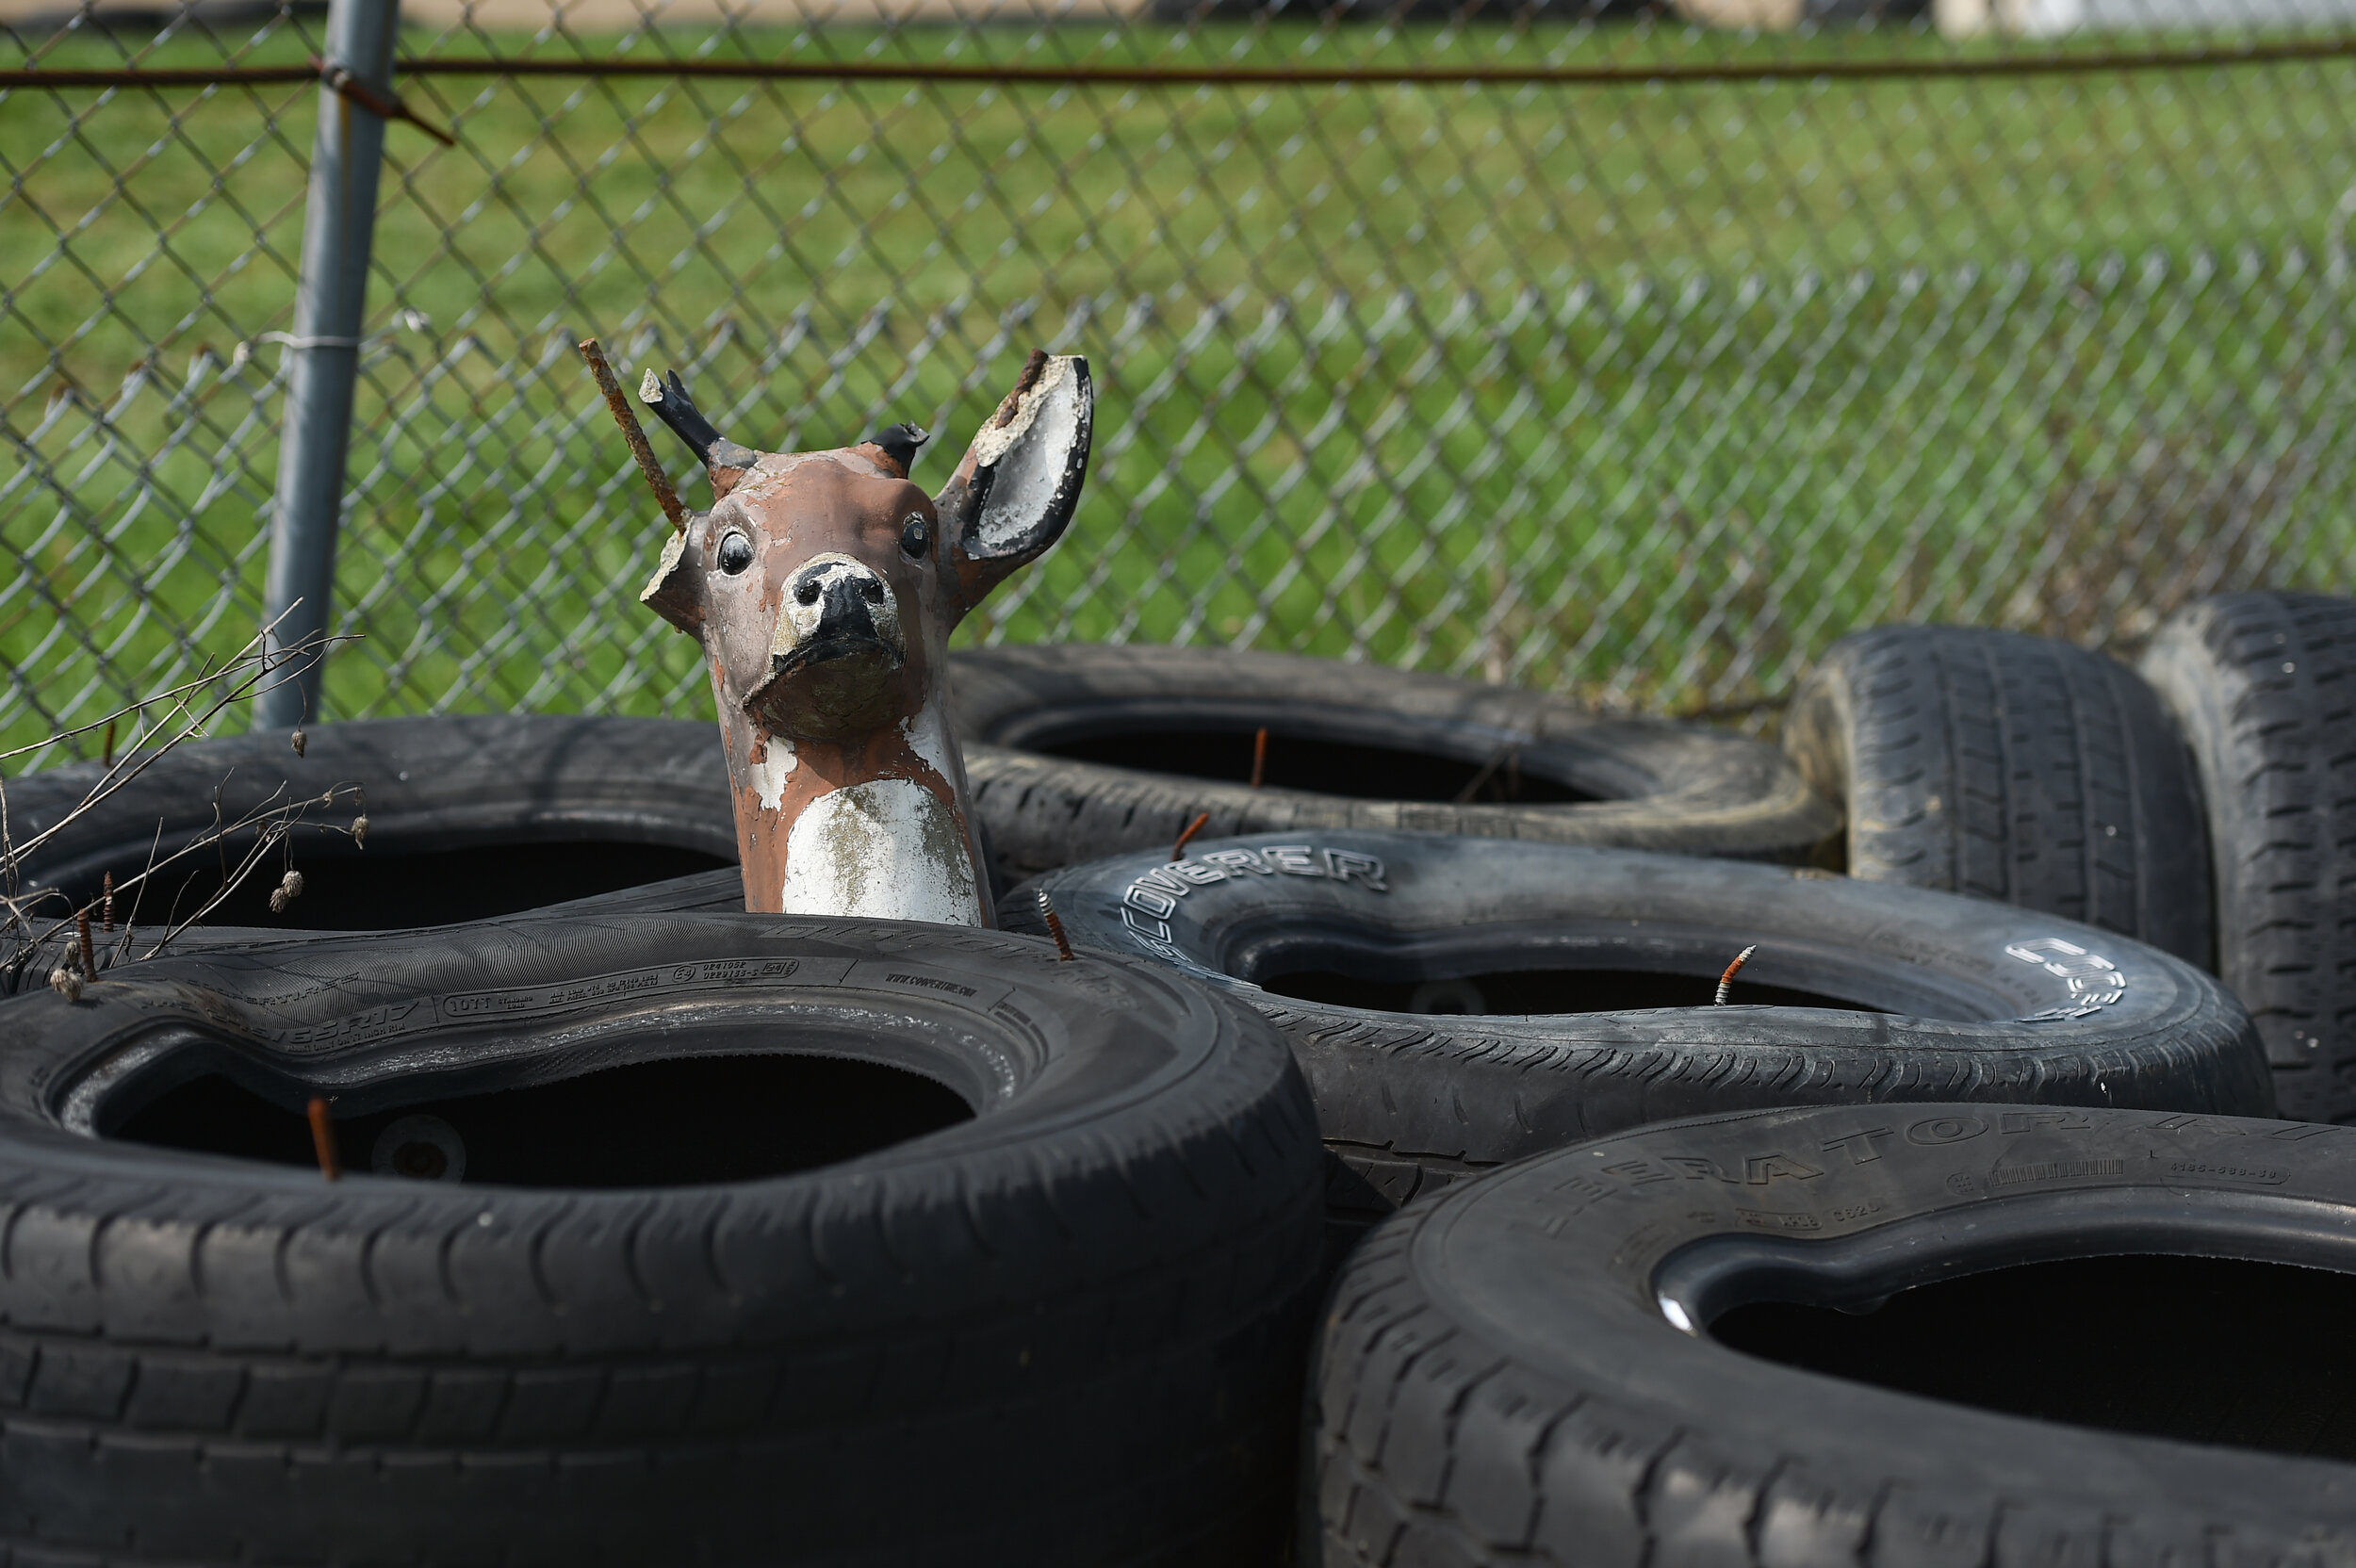  Fake deer in the run off tires at Mid-Ohio. I guess I don’t know what to say. 